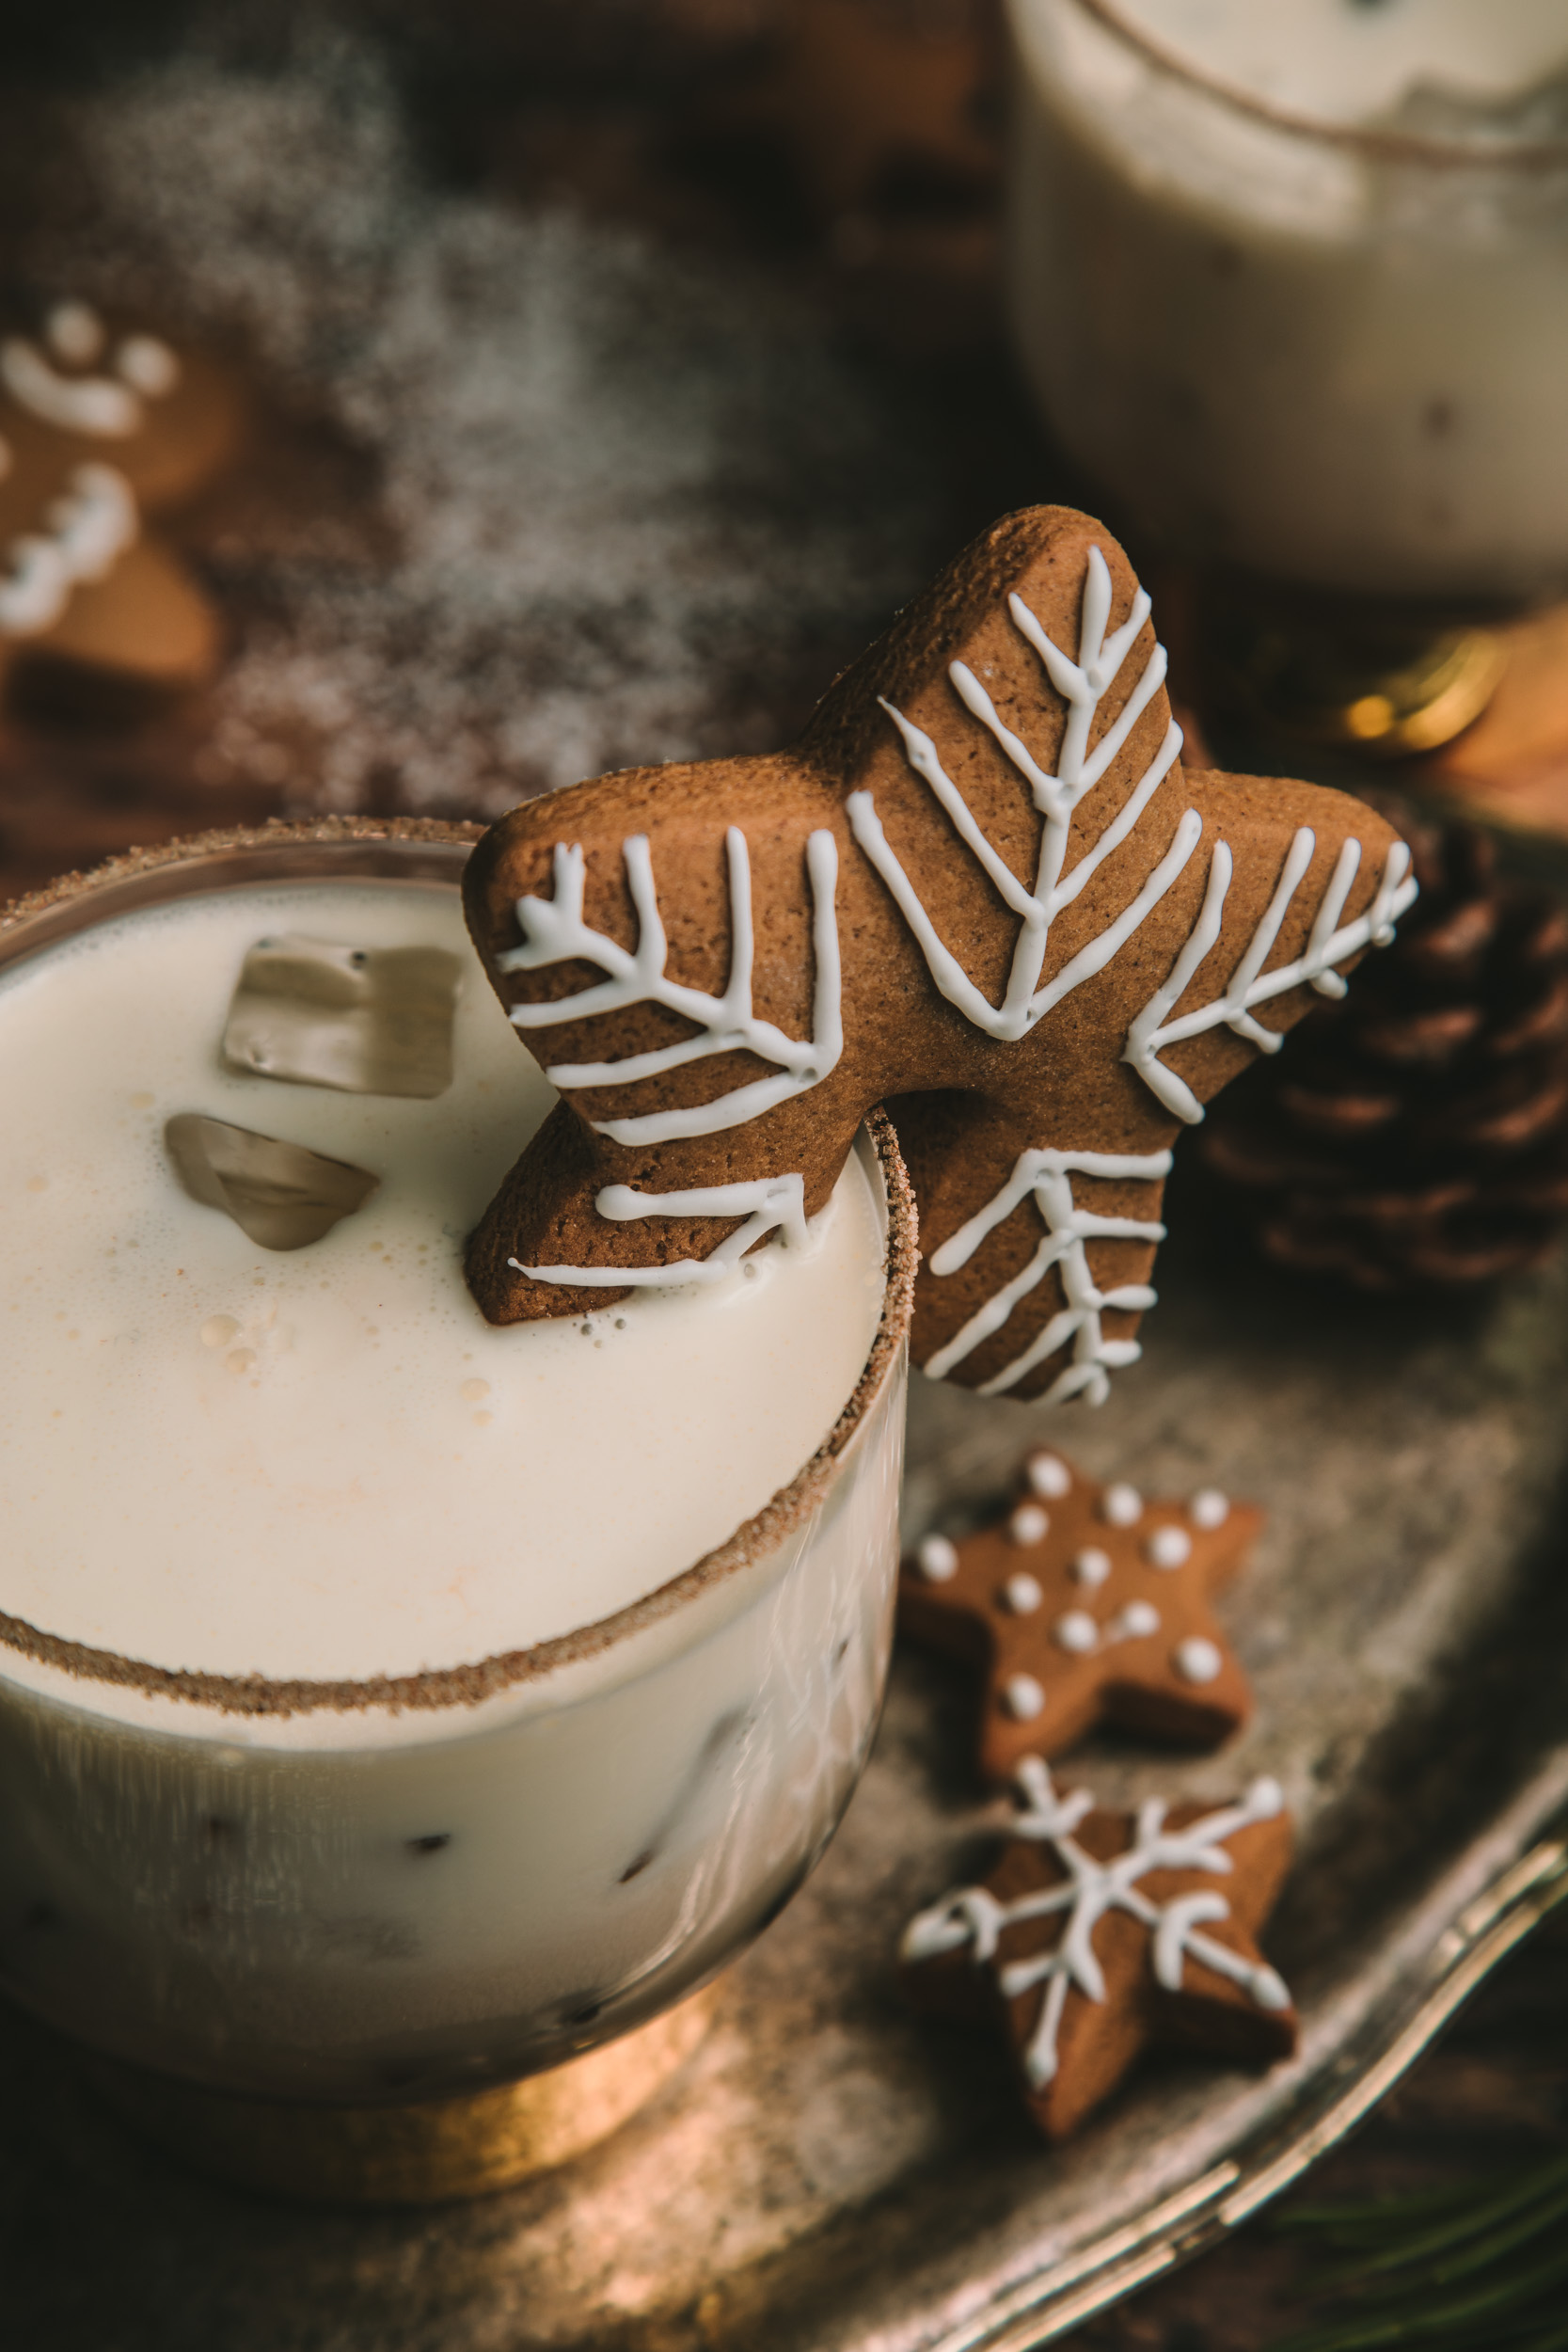 Gingerbread White Russian in a gold rimmed glass, garnished with a star shaped gingerbread cookie